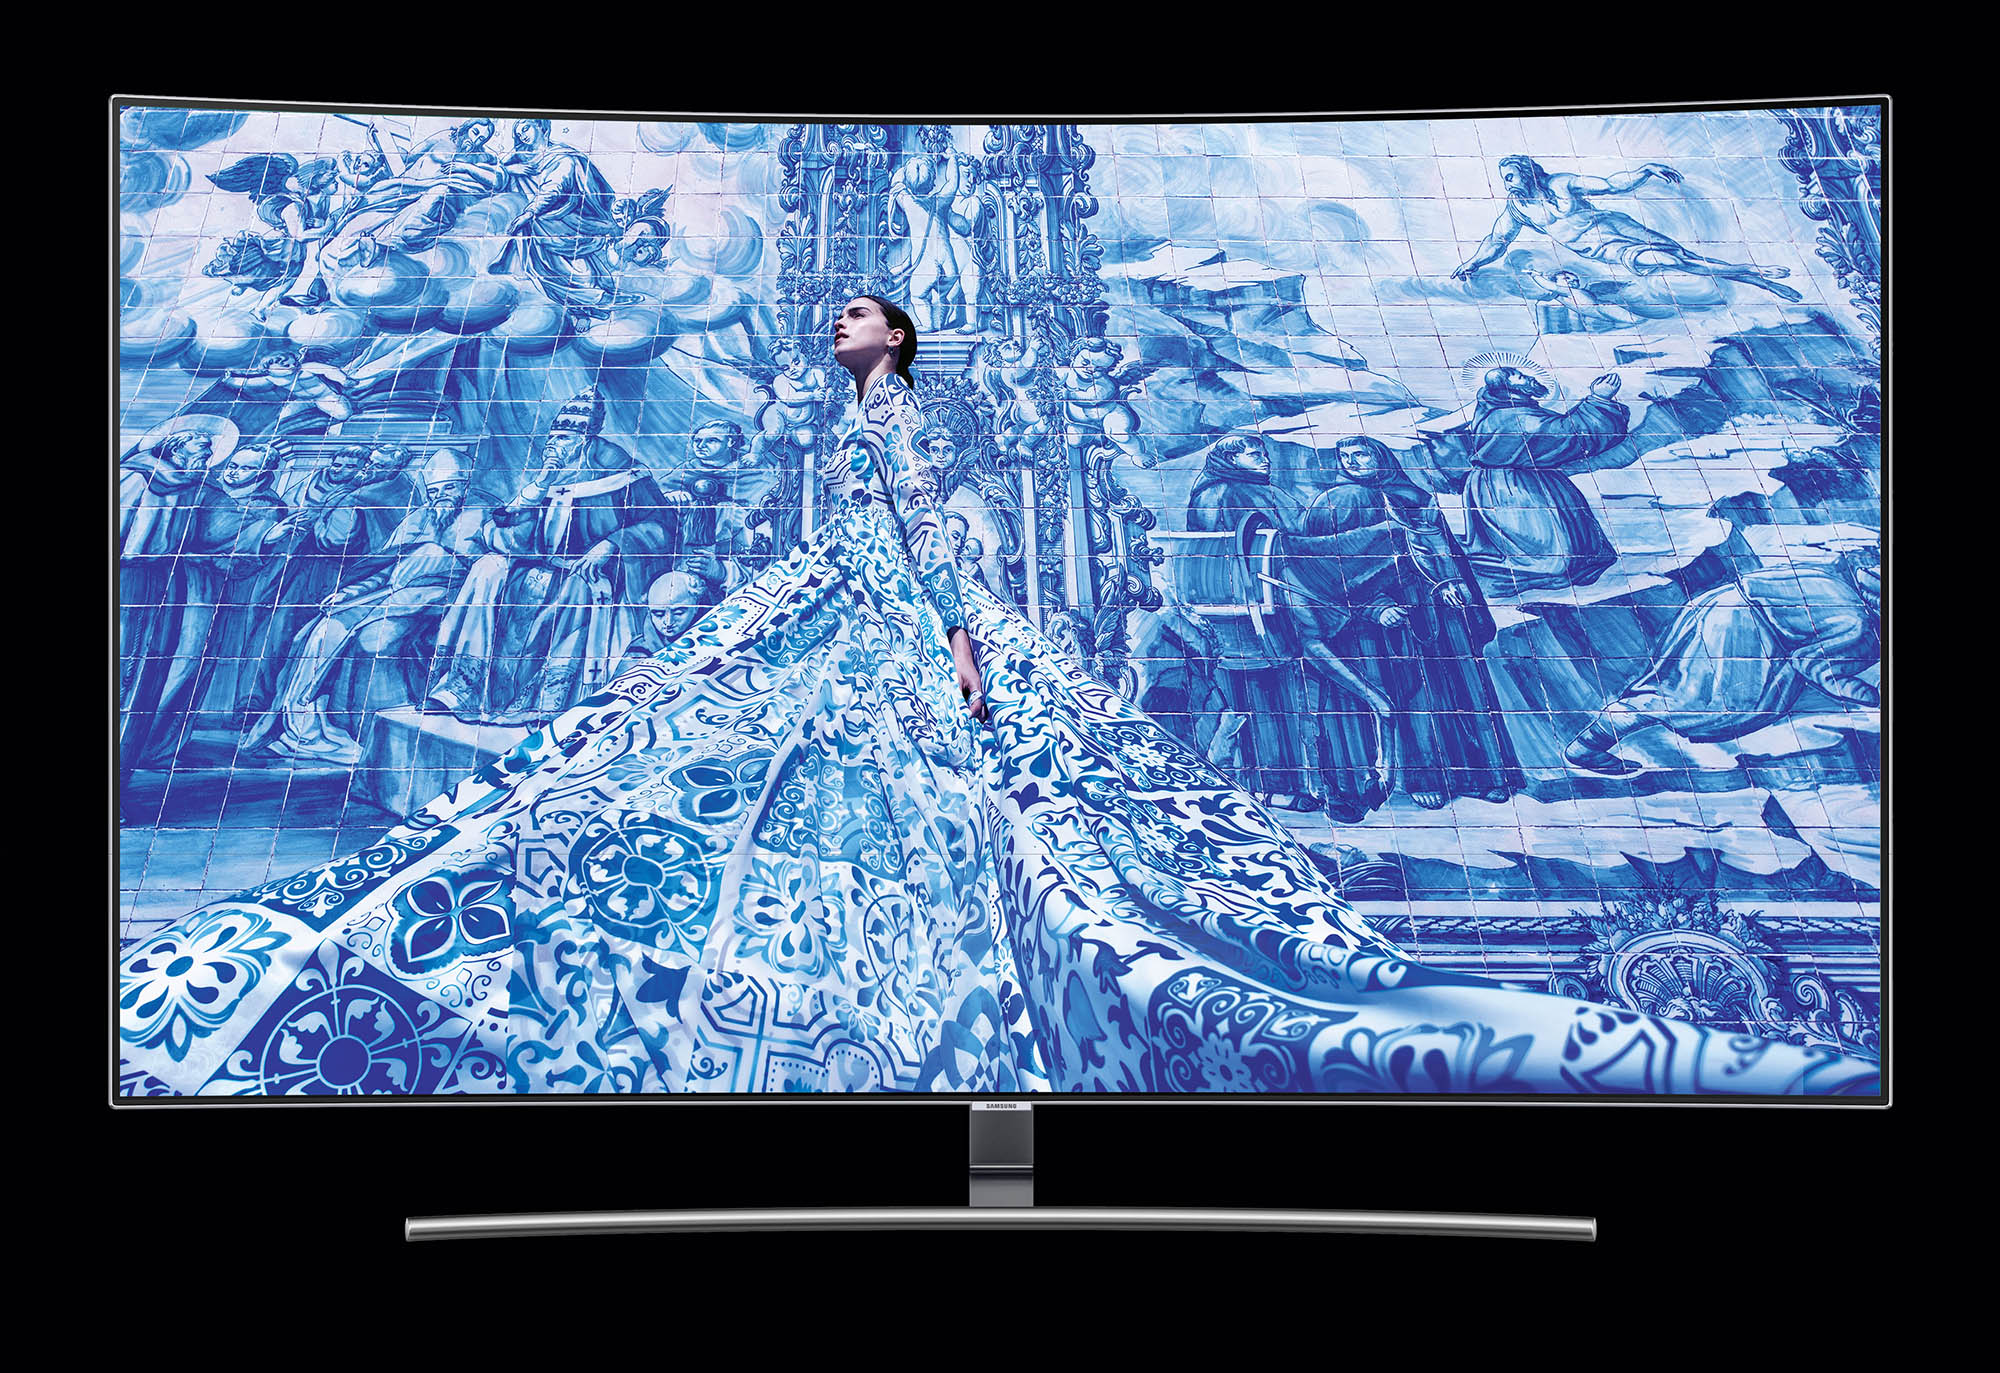 See Nothing Else with the Samsung 2018 QLED TV